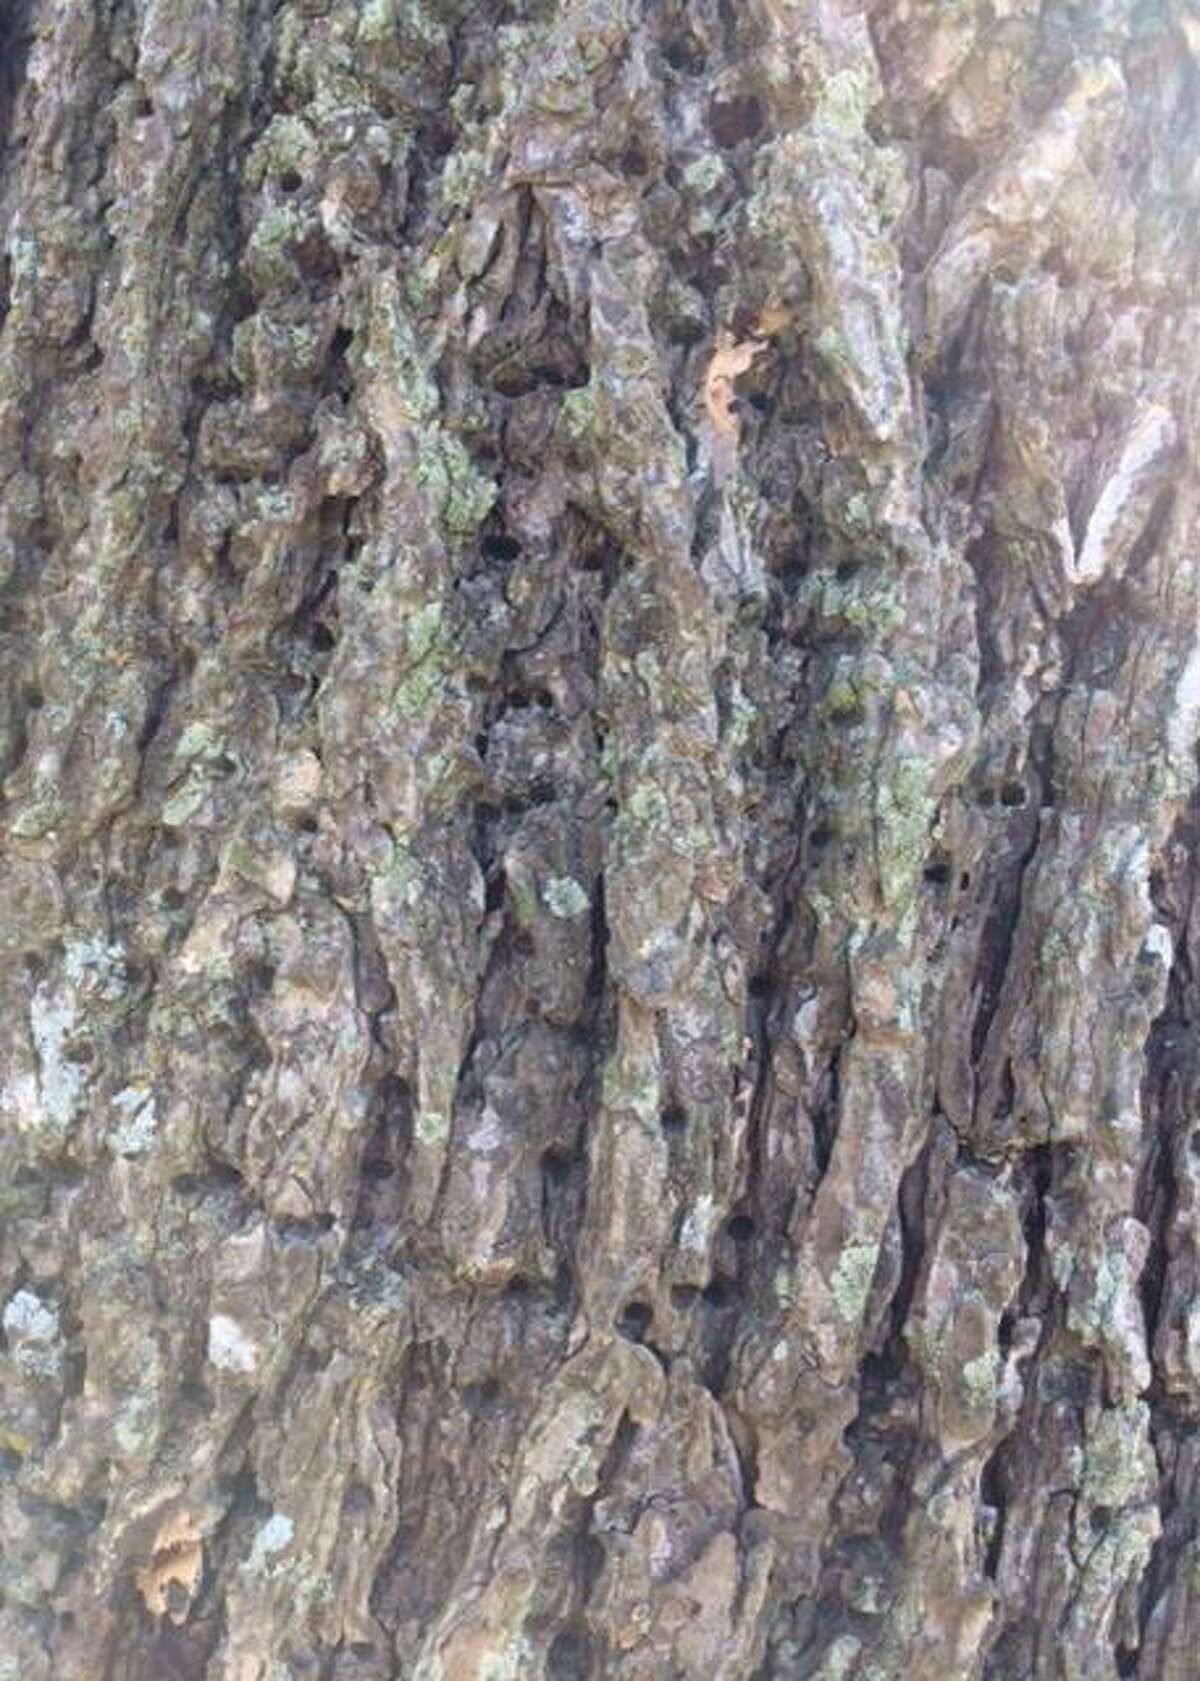 These are borer holes, randomly spaced on the tree?•s trunk.